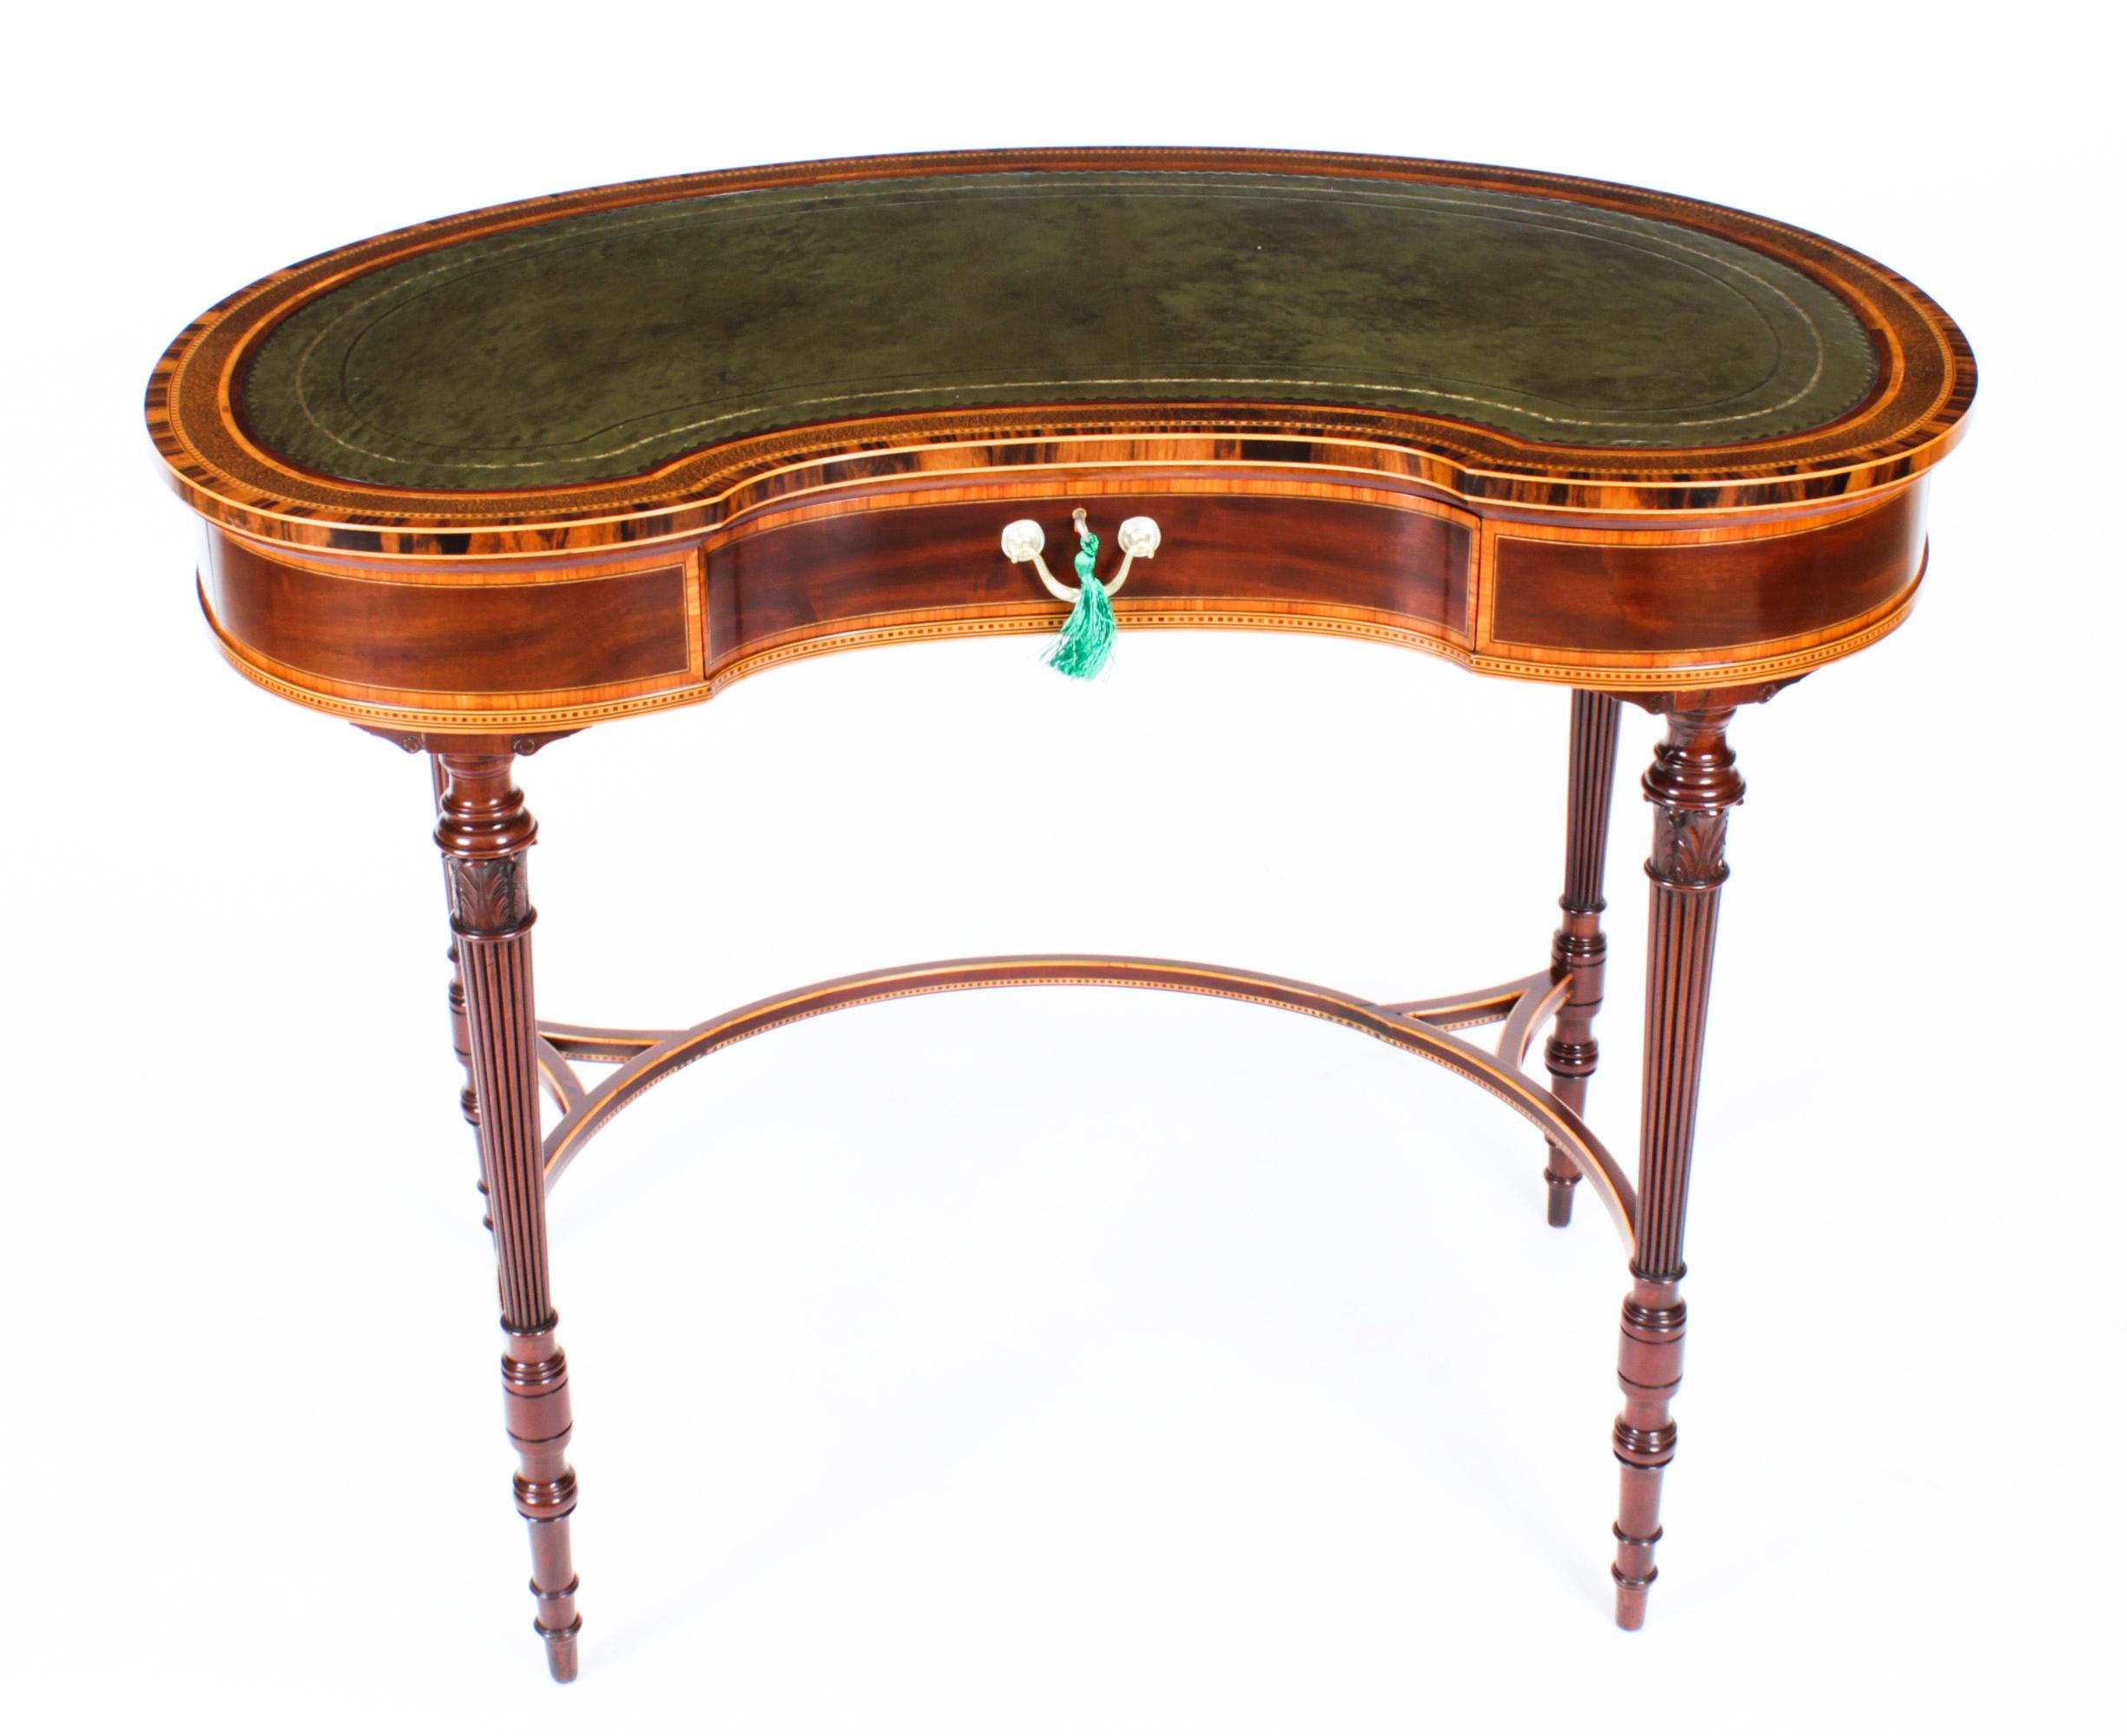 This is a fabulous quality antique Edwardian kidney shaped mahogany writing table by Maple & Co, circa 1890 in date. 
 
The shaped top is cross banded in various exotic specimen woods with an inset gold tooled green leather writing surface. The